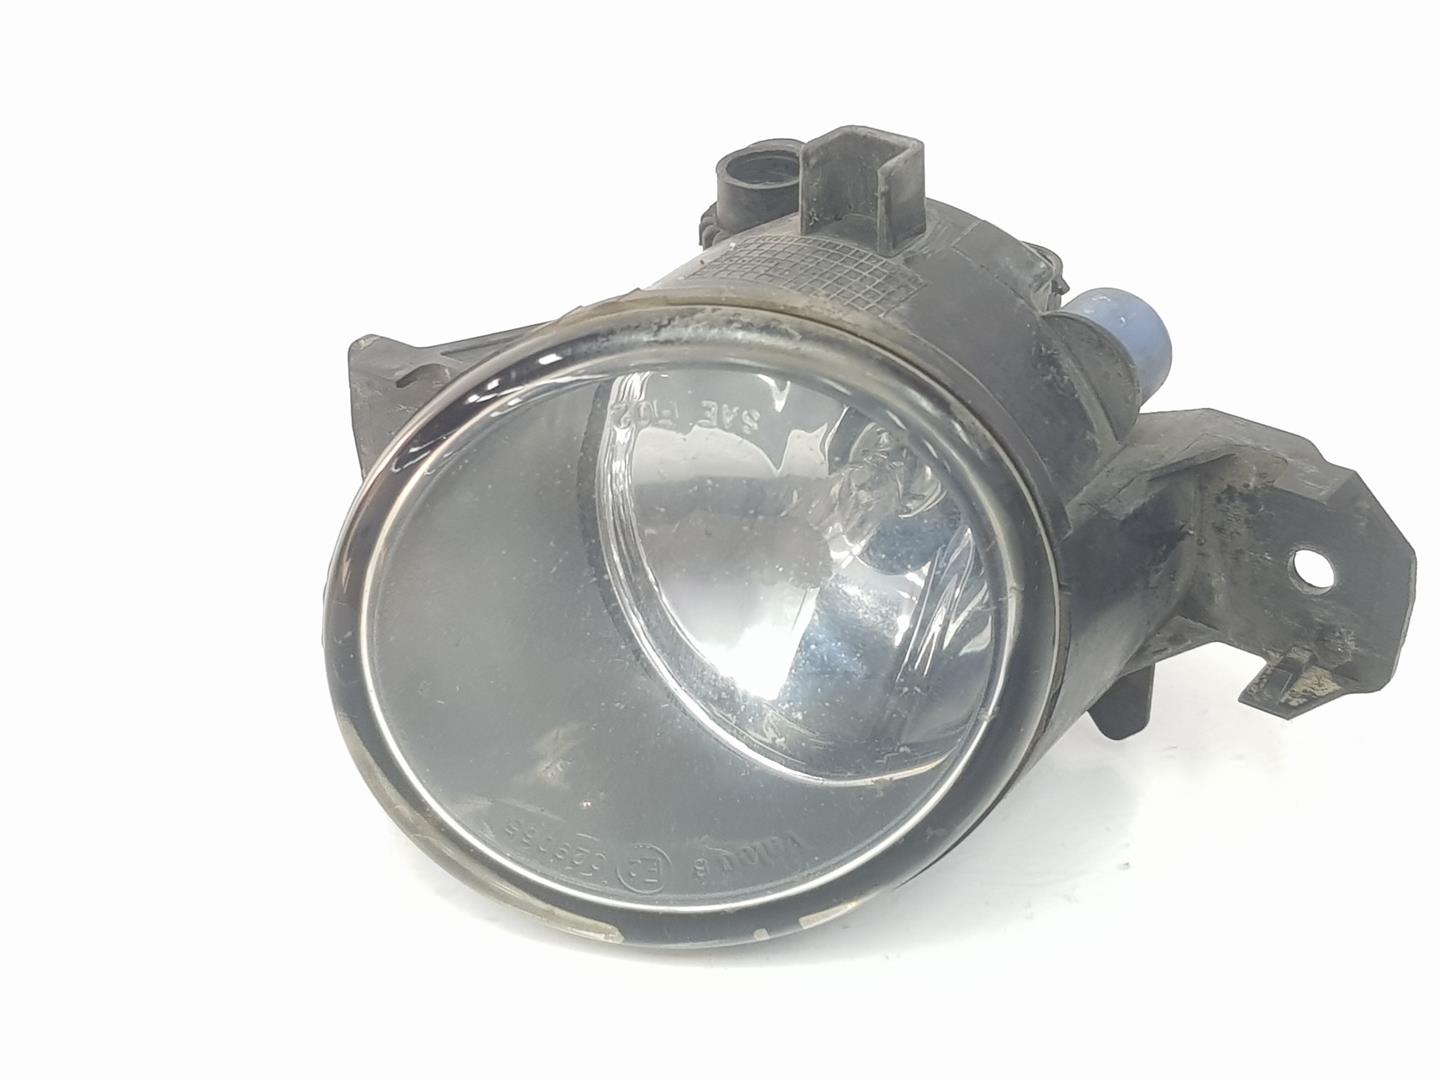 RENAULT Espace 4 generation (2002-2014) Front Right Fog Light 8200301027, 8200002470 19858843